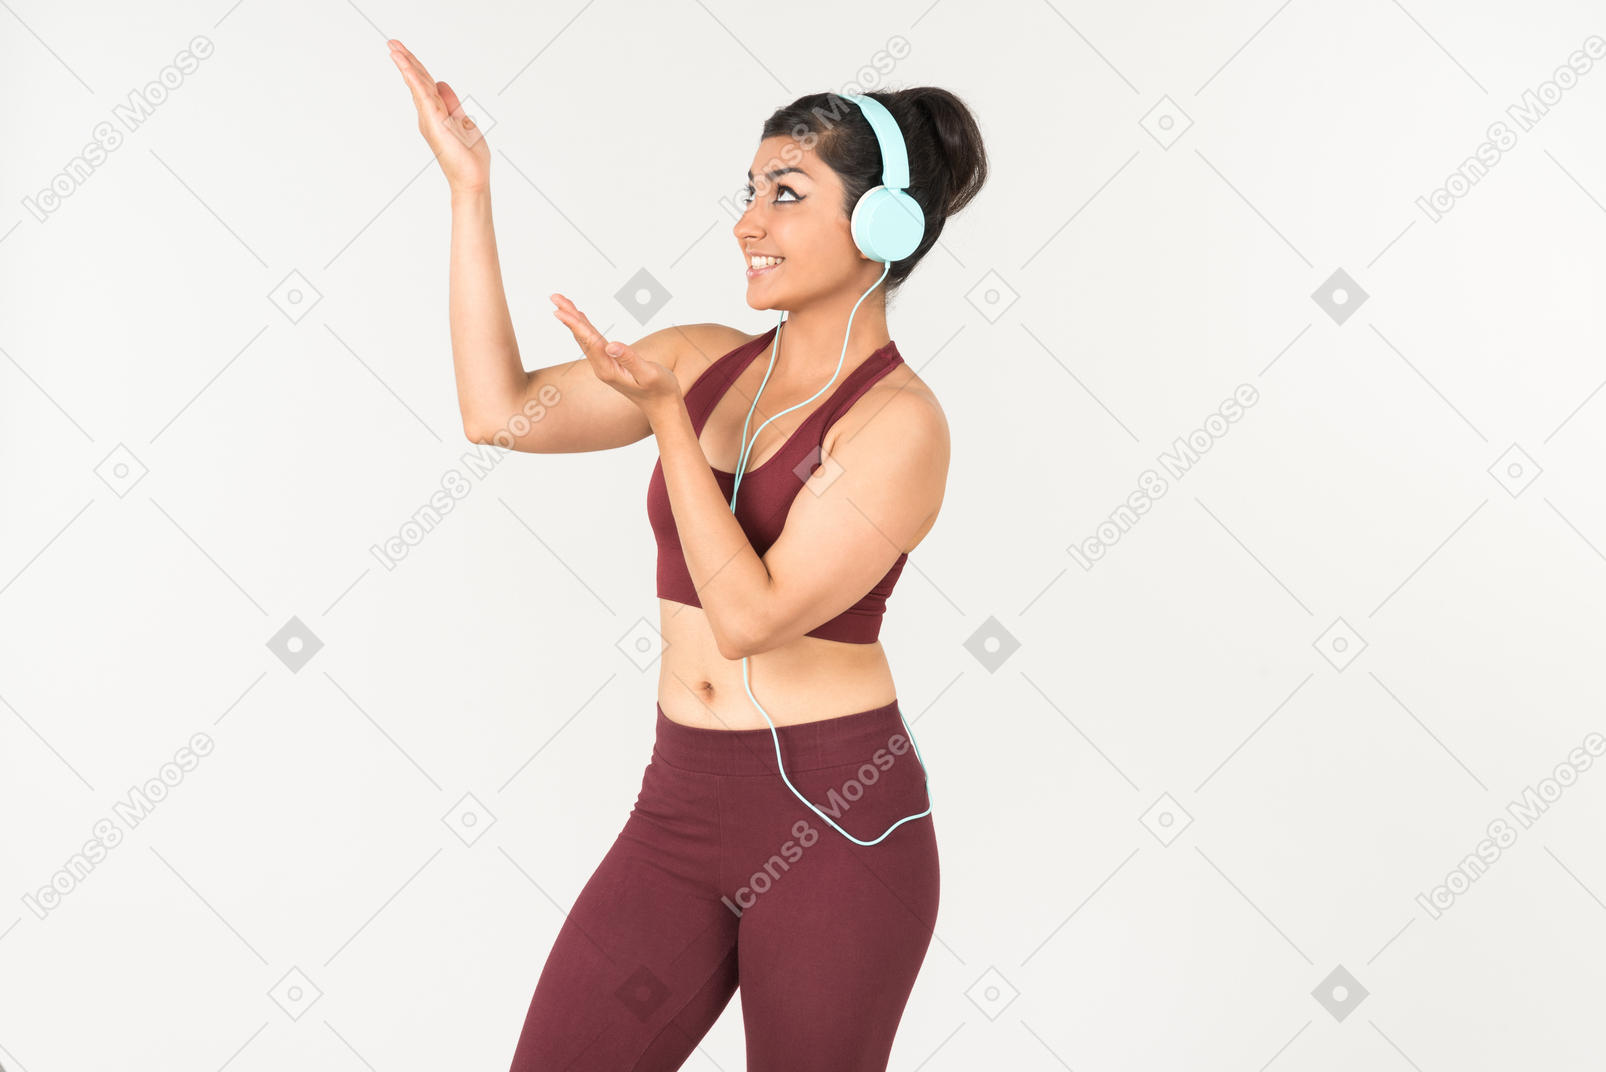 Smiling young indian woman in sporstwear listening to music in headphones